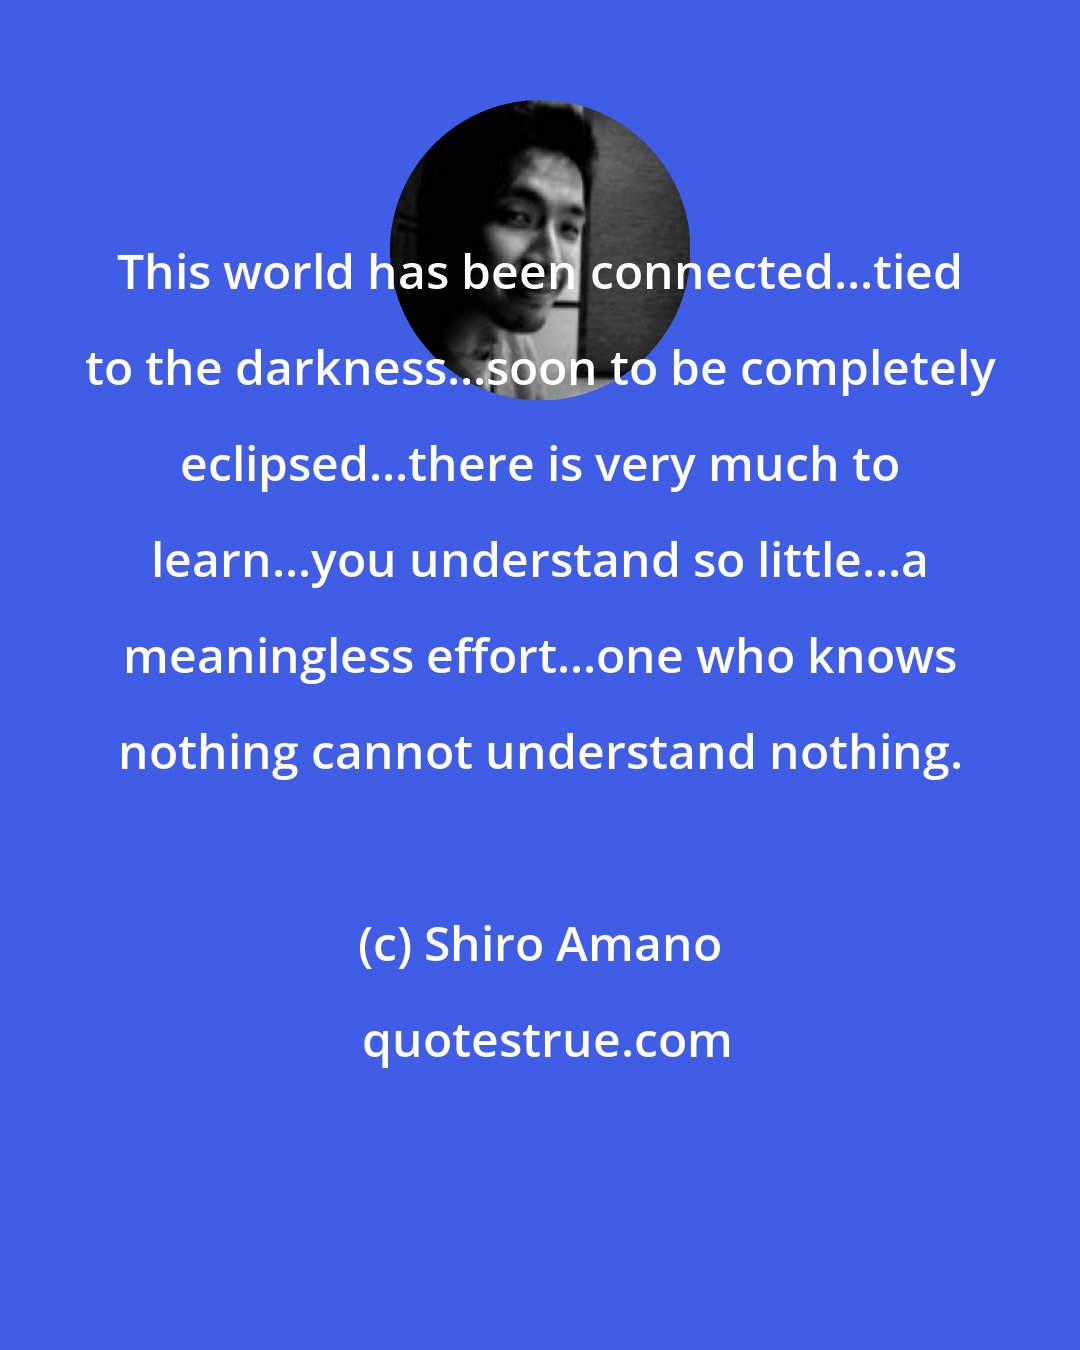 Shiro Amano: This world has been connected...tied to the darkness...soon to be completely eclipsed...there is very much to learn...you understand so little...a meaningless effort...one who knows nothing cannot understand nothing.